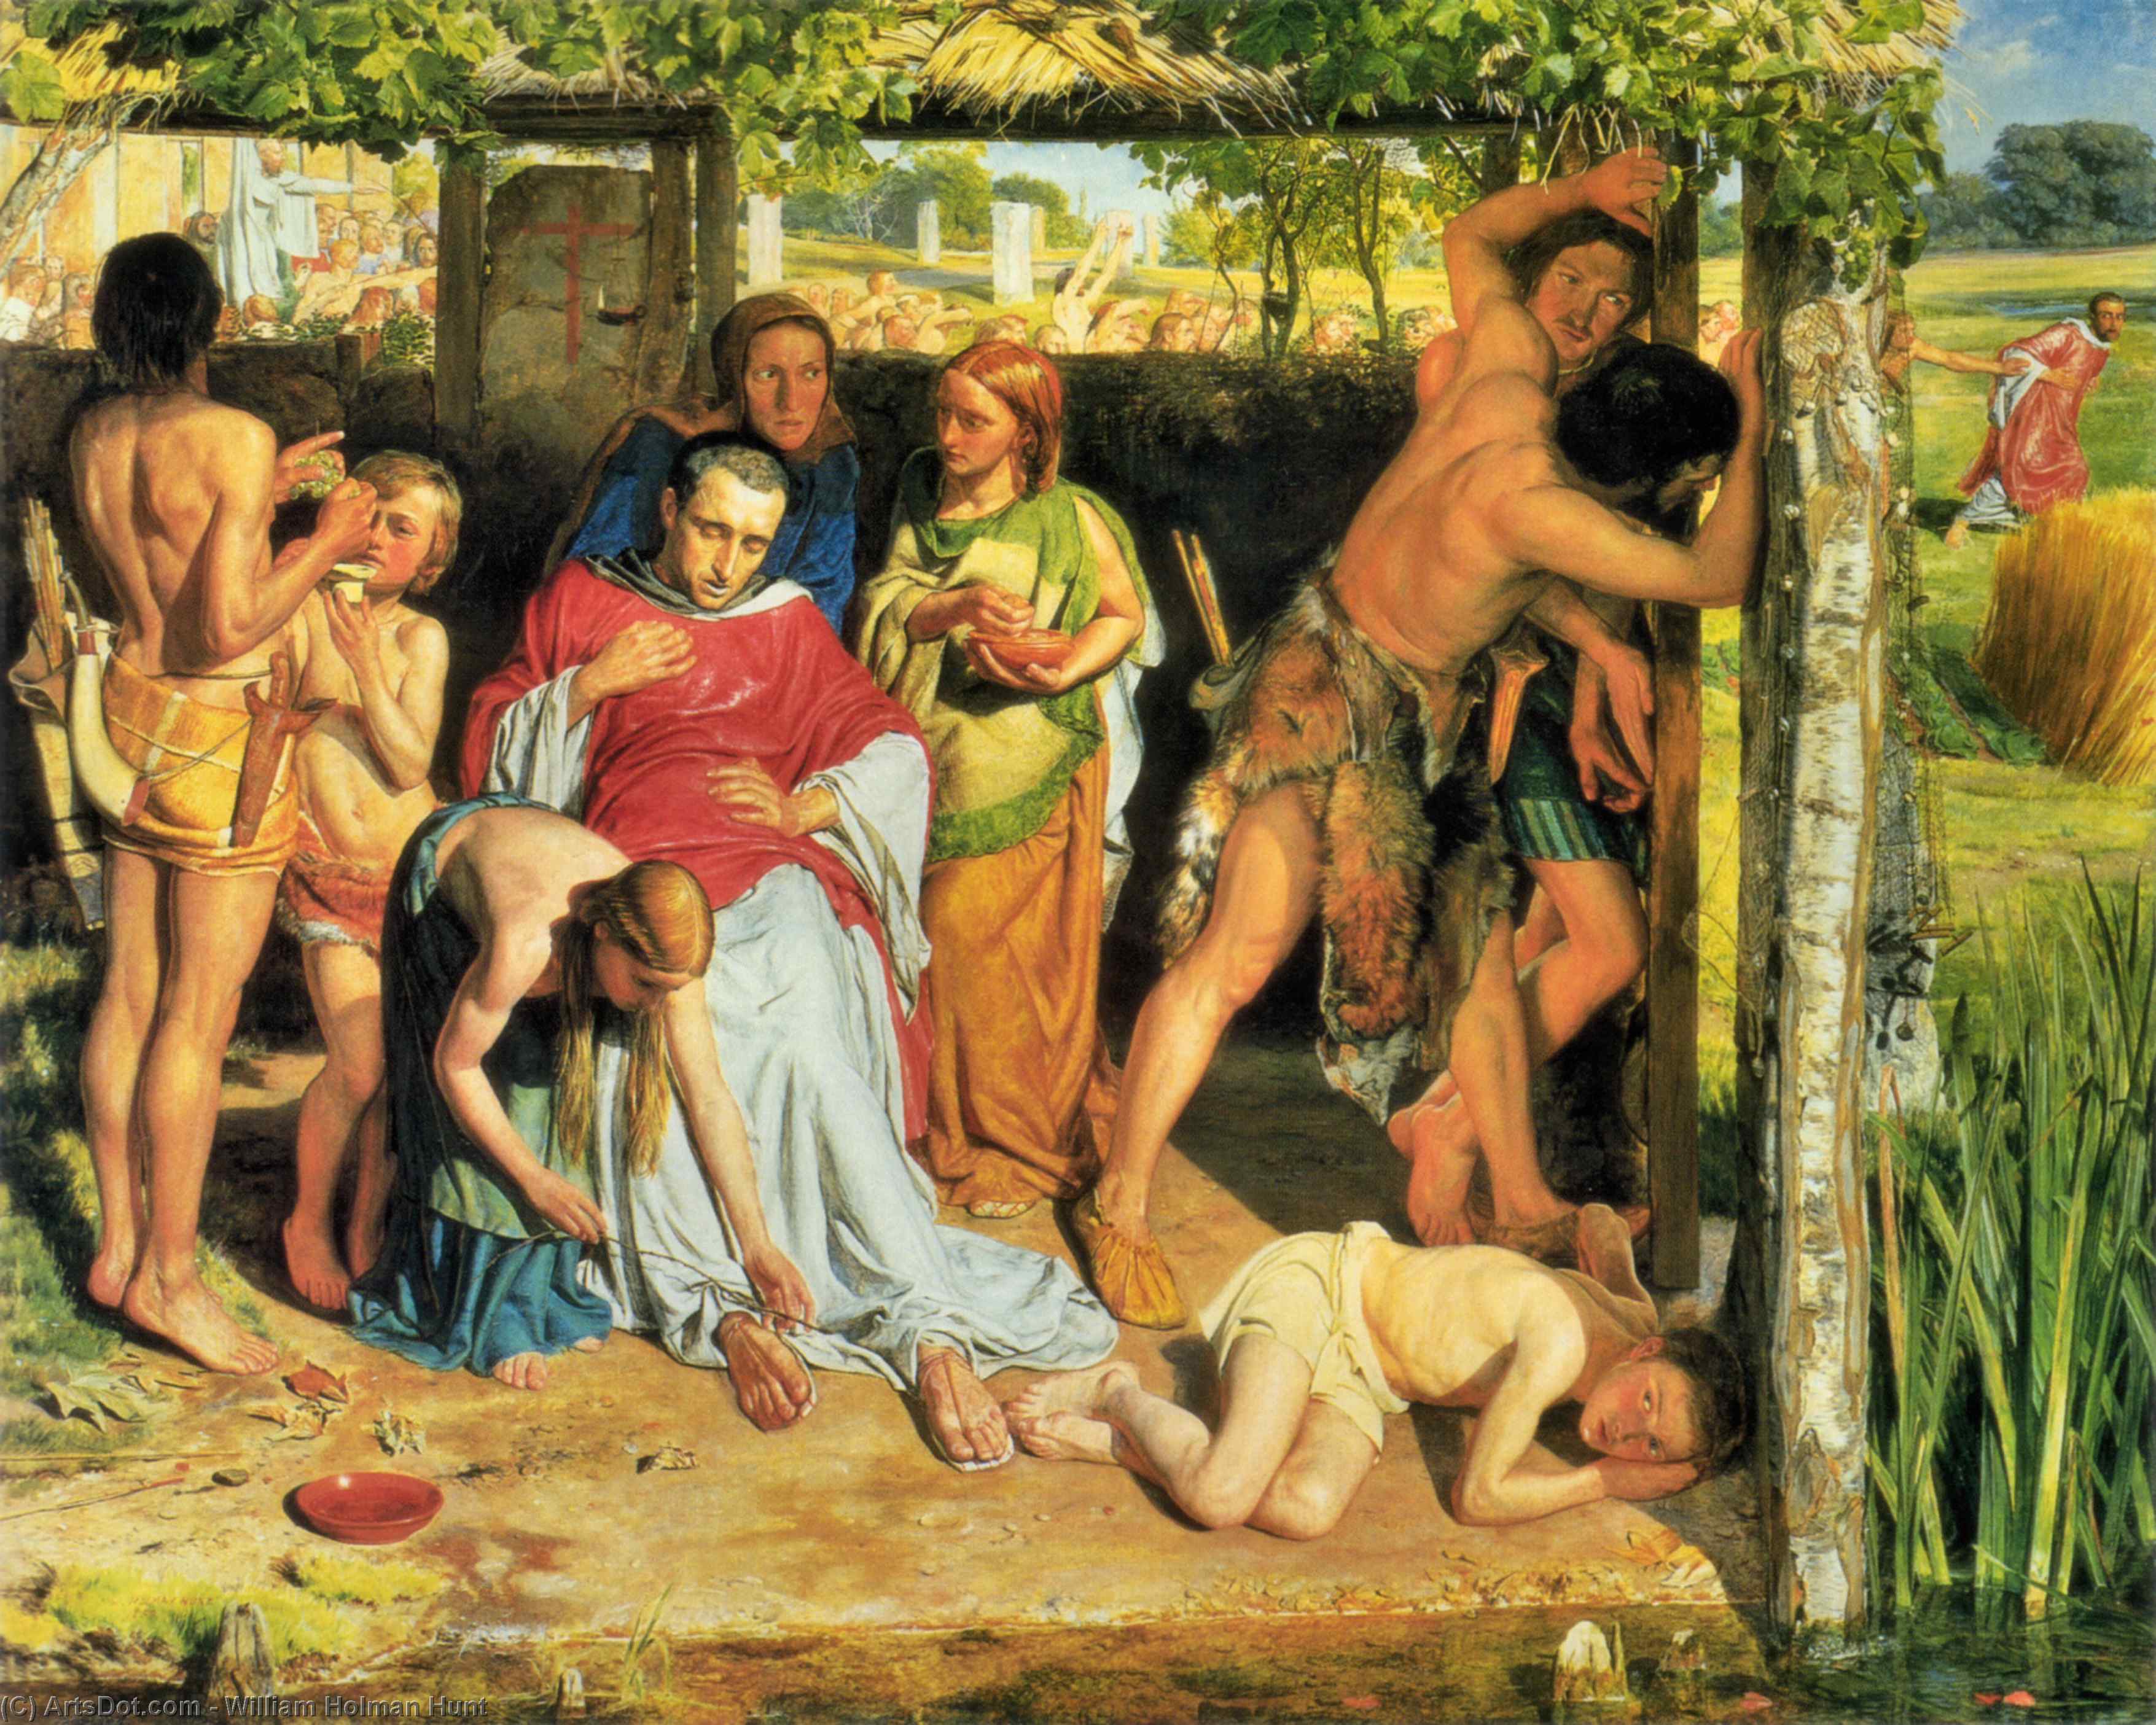 WikiOO.org - Encyclopedia of Fine Arts - Malba, Artwork William Holman Hunt - A Converted British Family Sheltering a Christian Missionary from the Persecution of the Druids